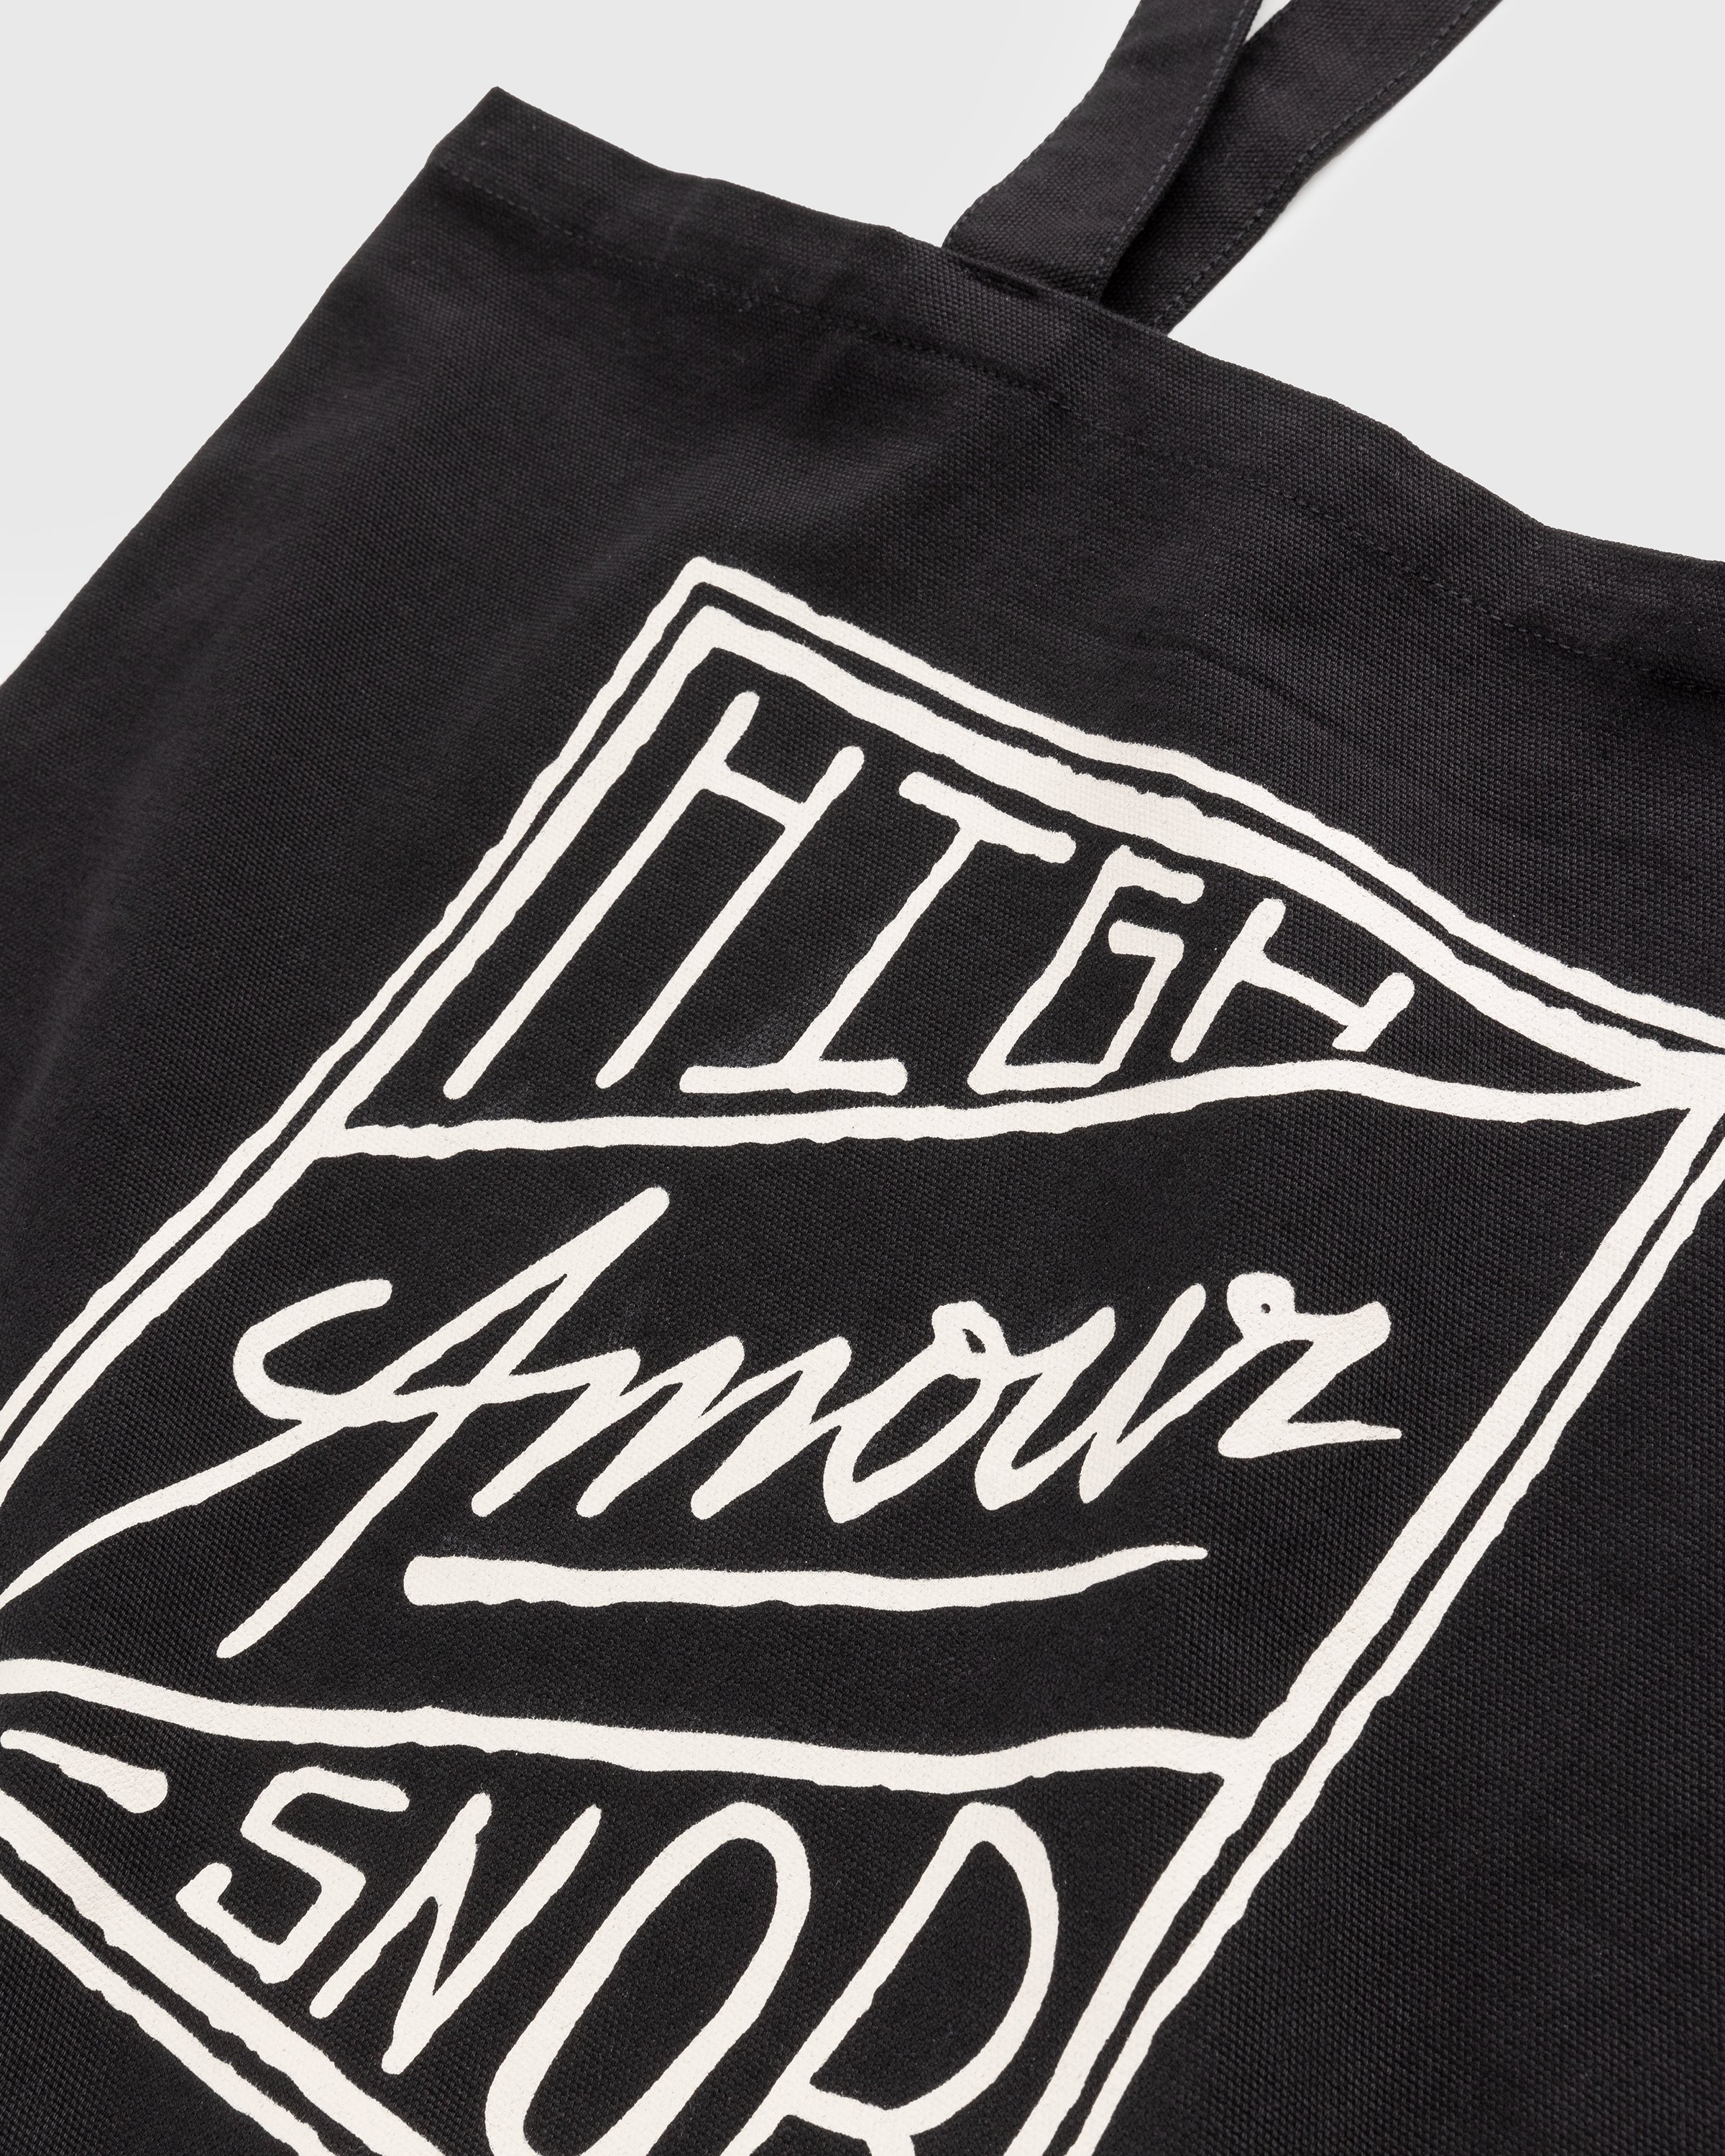 Hotel Amour x Highsnobiety - Not In Paris 4 Tote Bag Black - Accessories - Black - Image 4